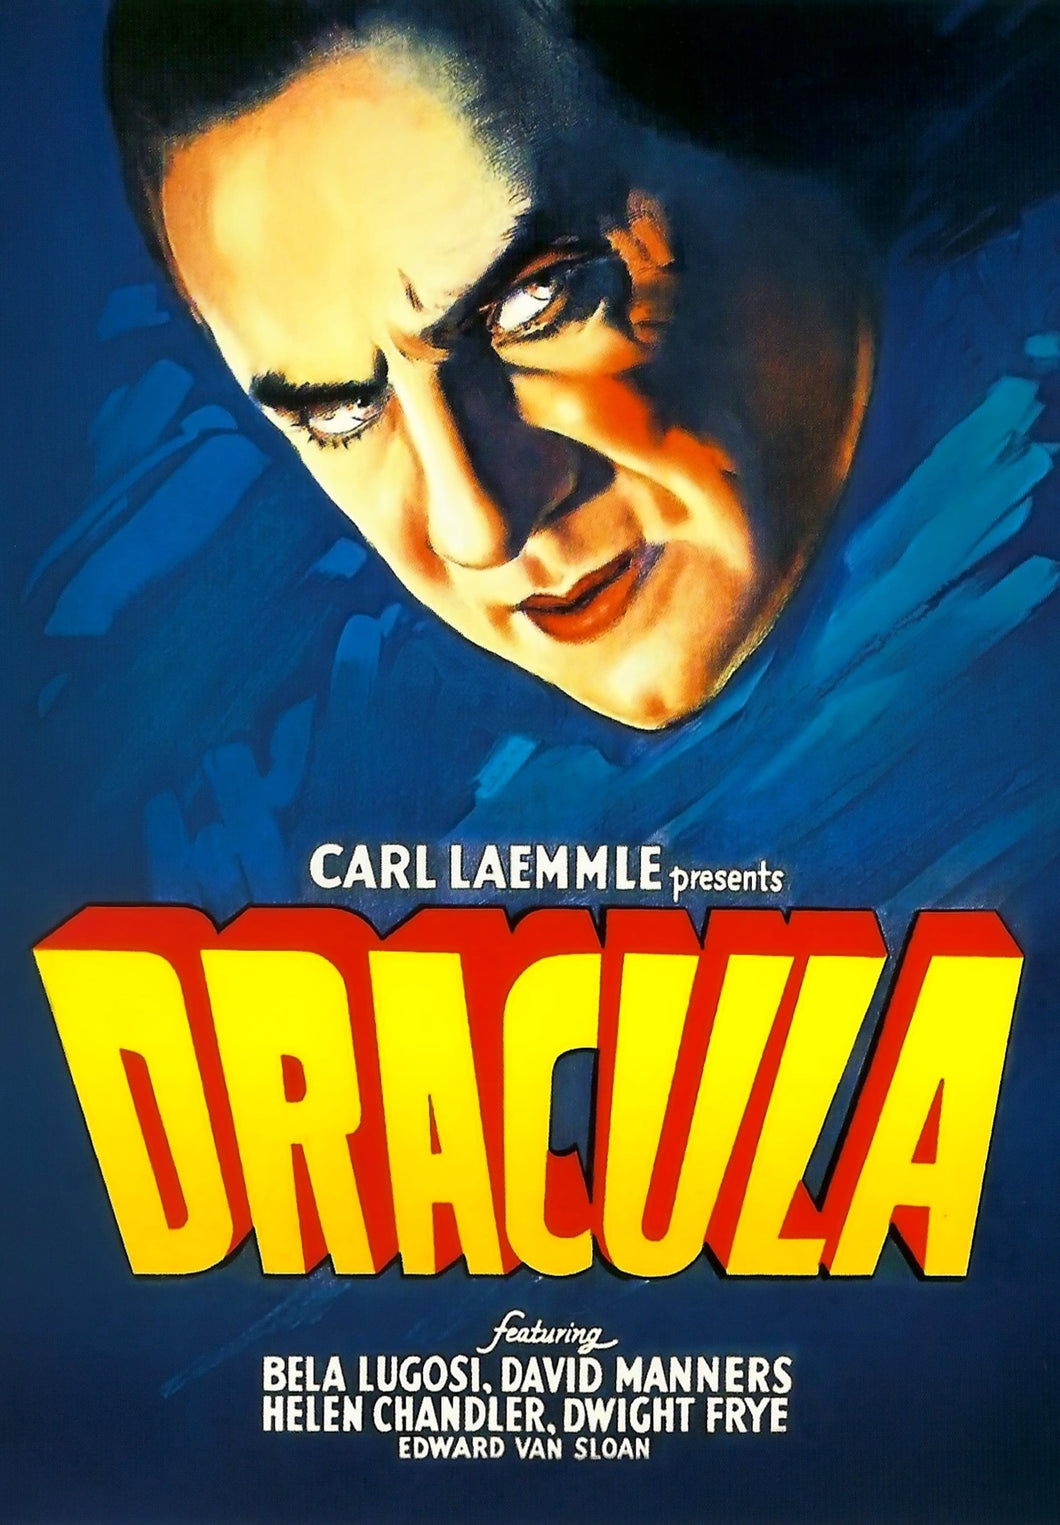 Dracula (1931) Movie Poster High Quality Glossy Paper A1 A2 A3 A4 A3 Framed or Unframed!!!